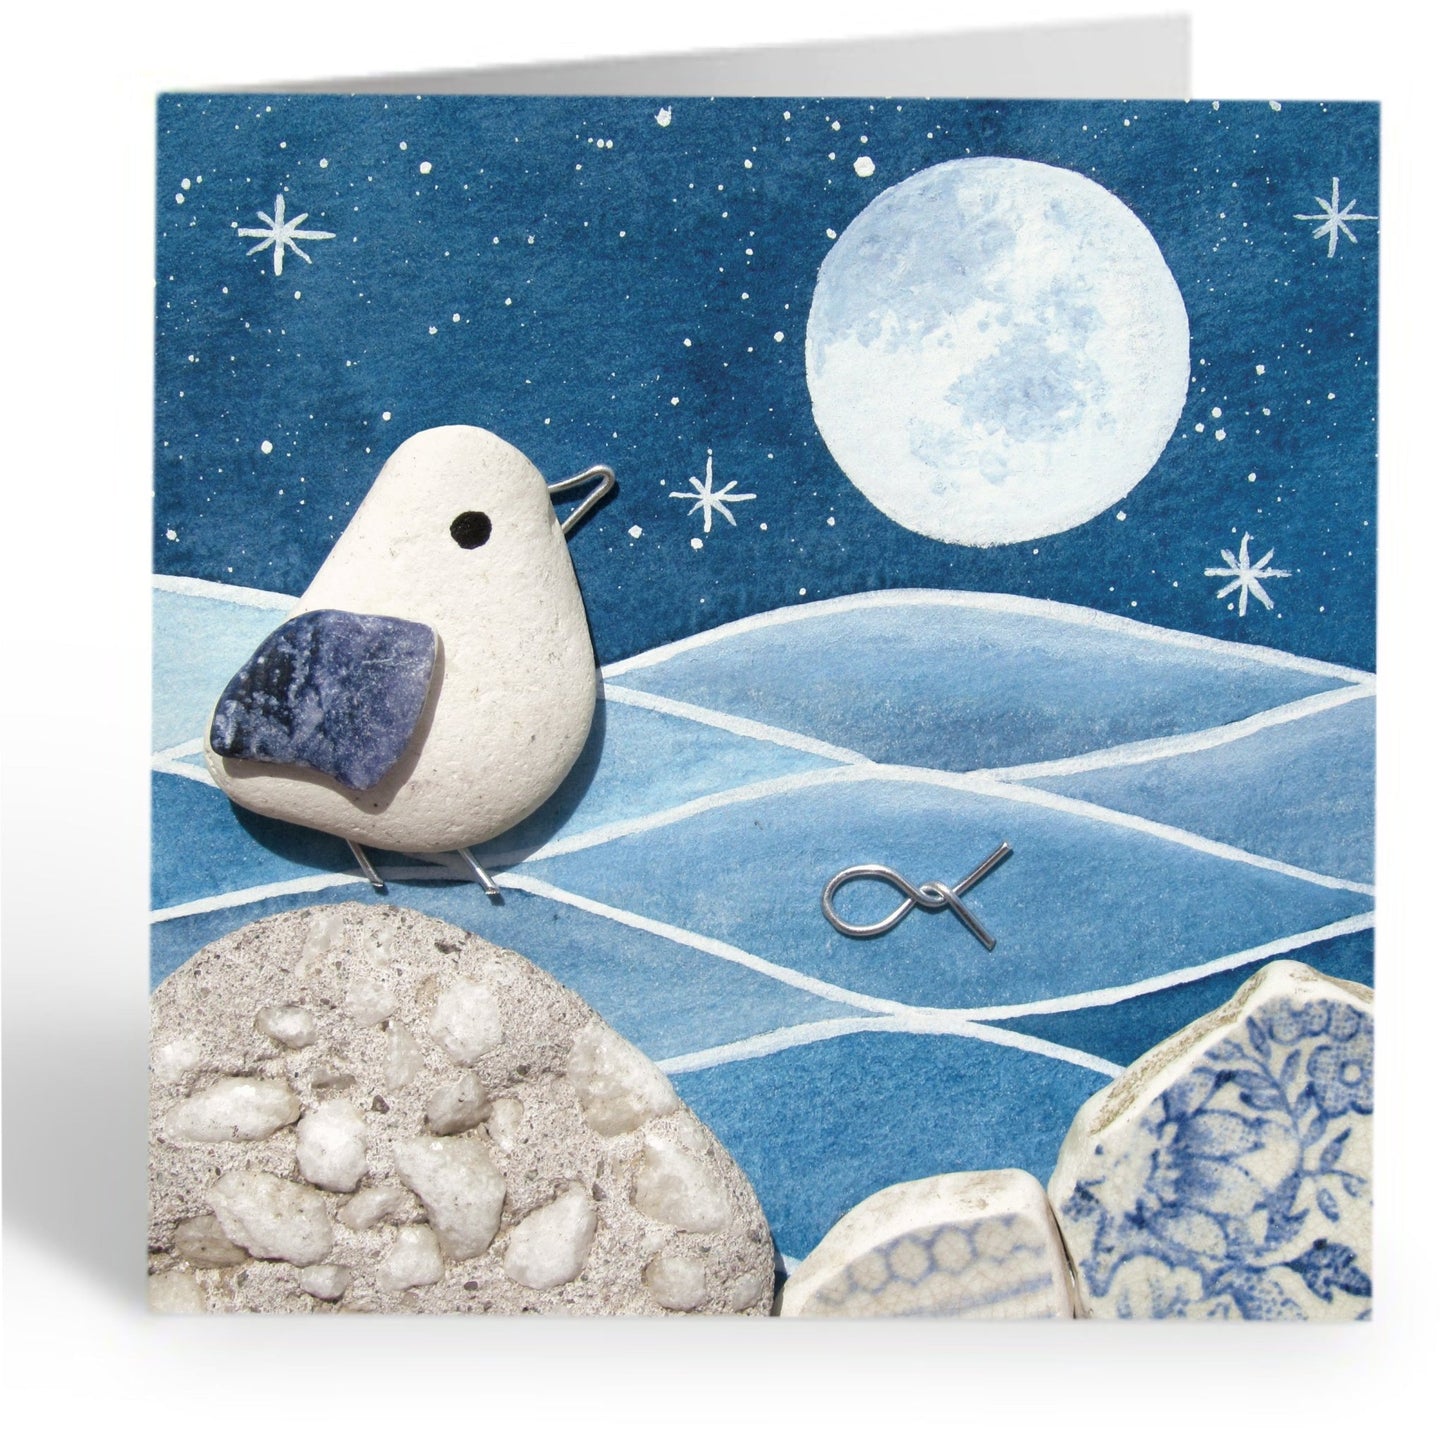 Greetings Cards (Pack of 4) "Moonlight Marines" Seagulls and Whales - East Neuk Beach Crafts